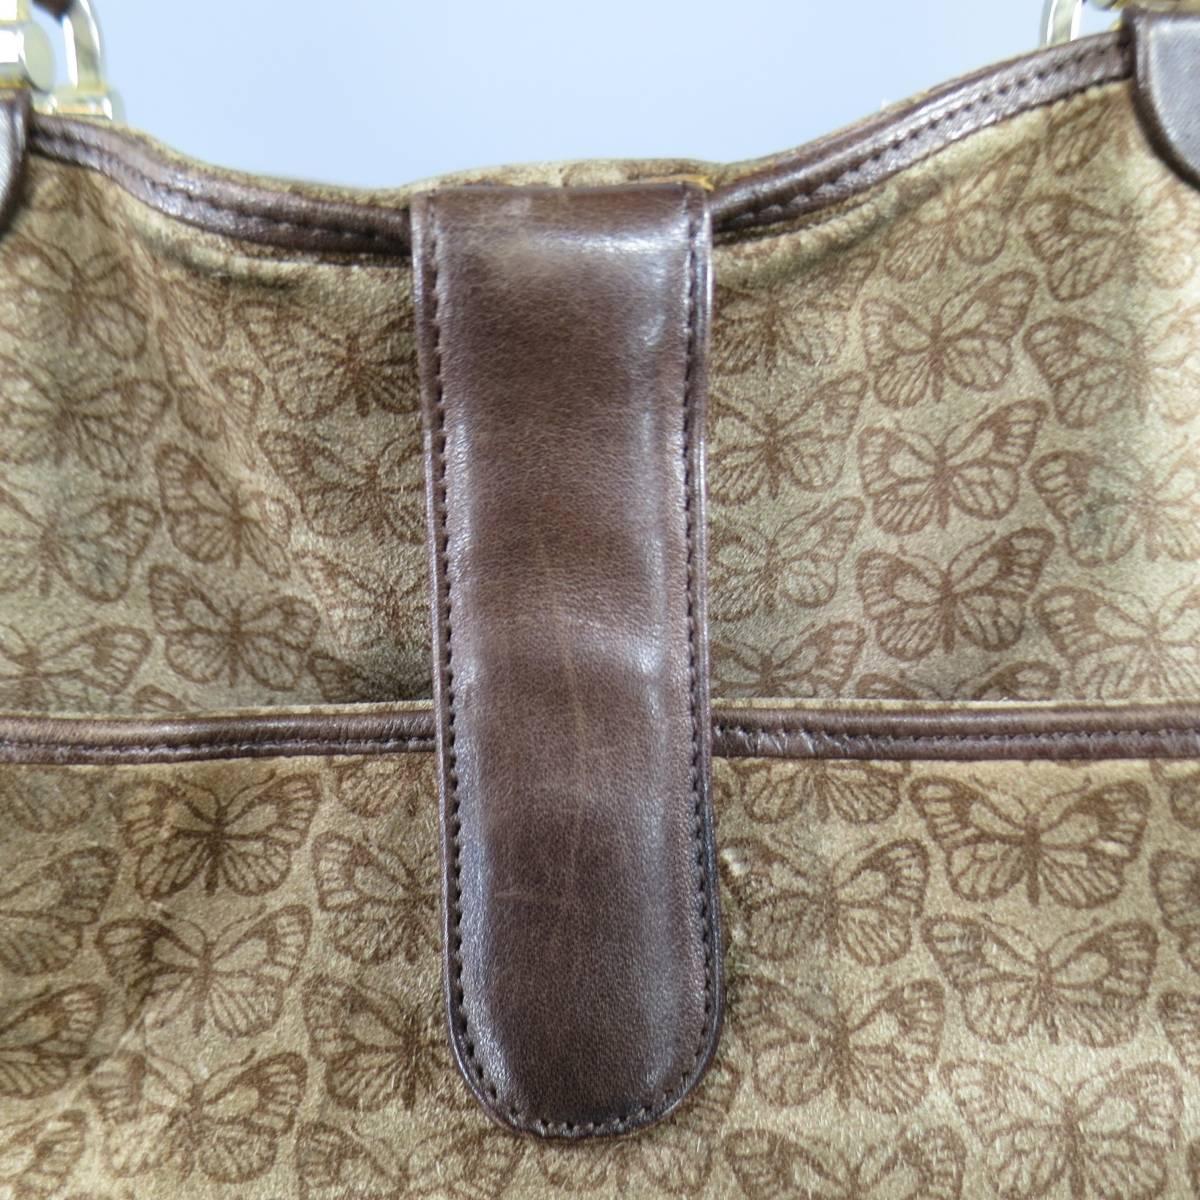 This vintage BOTTEGA VENETA tote bag comes in light taupe brown suede with all over butterfly print and features brown leather piping, double top handles with light gold tone hardware, and snap closure. In as-is condition with wear shown in detail